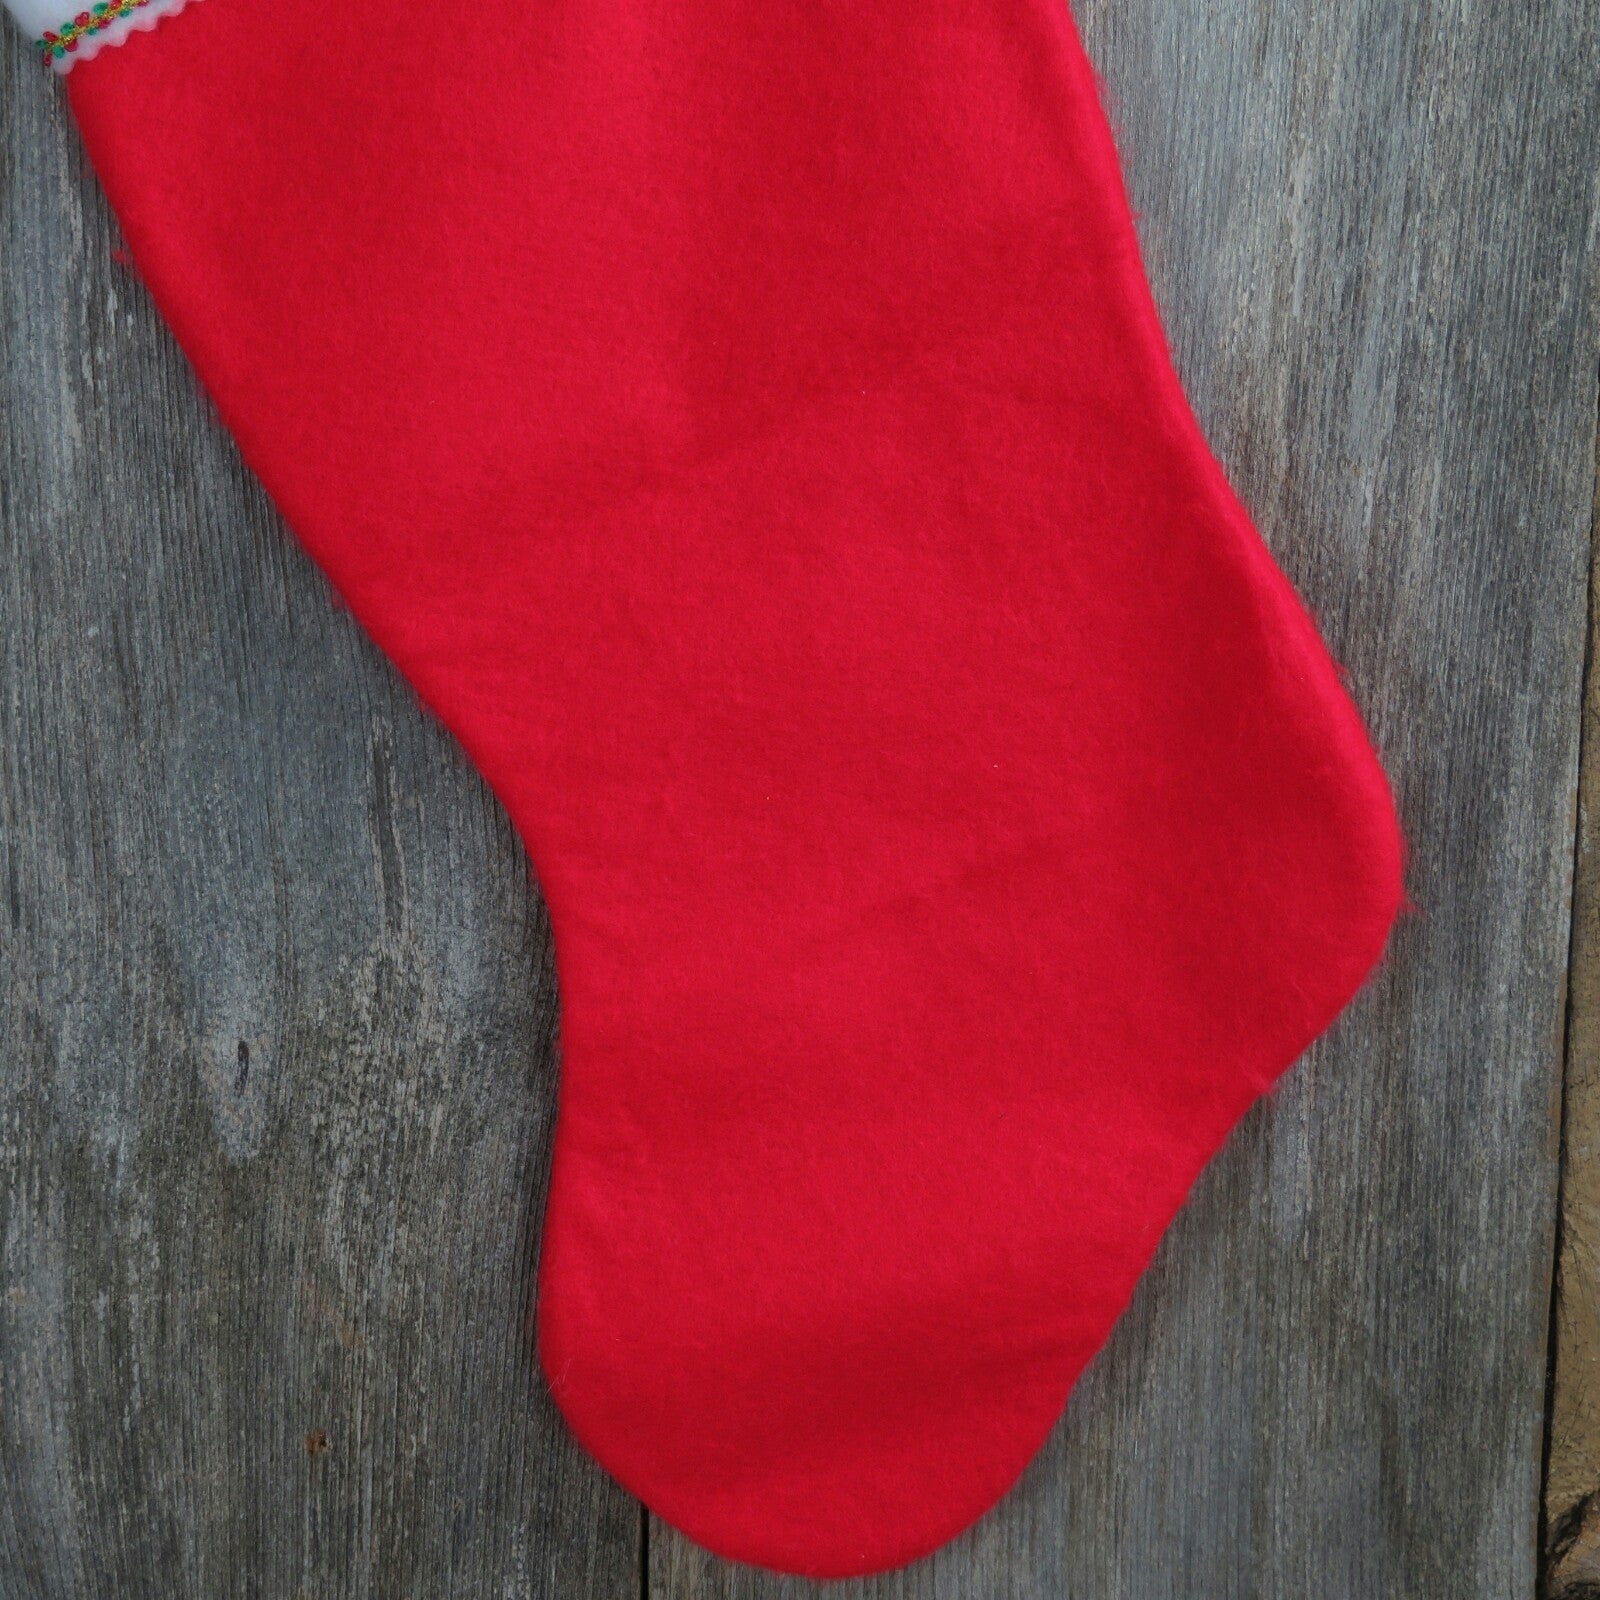 Vintage Fleece Christmas Stocking Red Felt Fuzzy White Cuff Trim Traditional ST111 Holiday Decor - At Grandma's Table